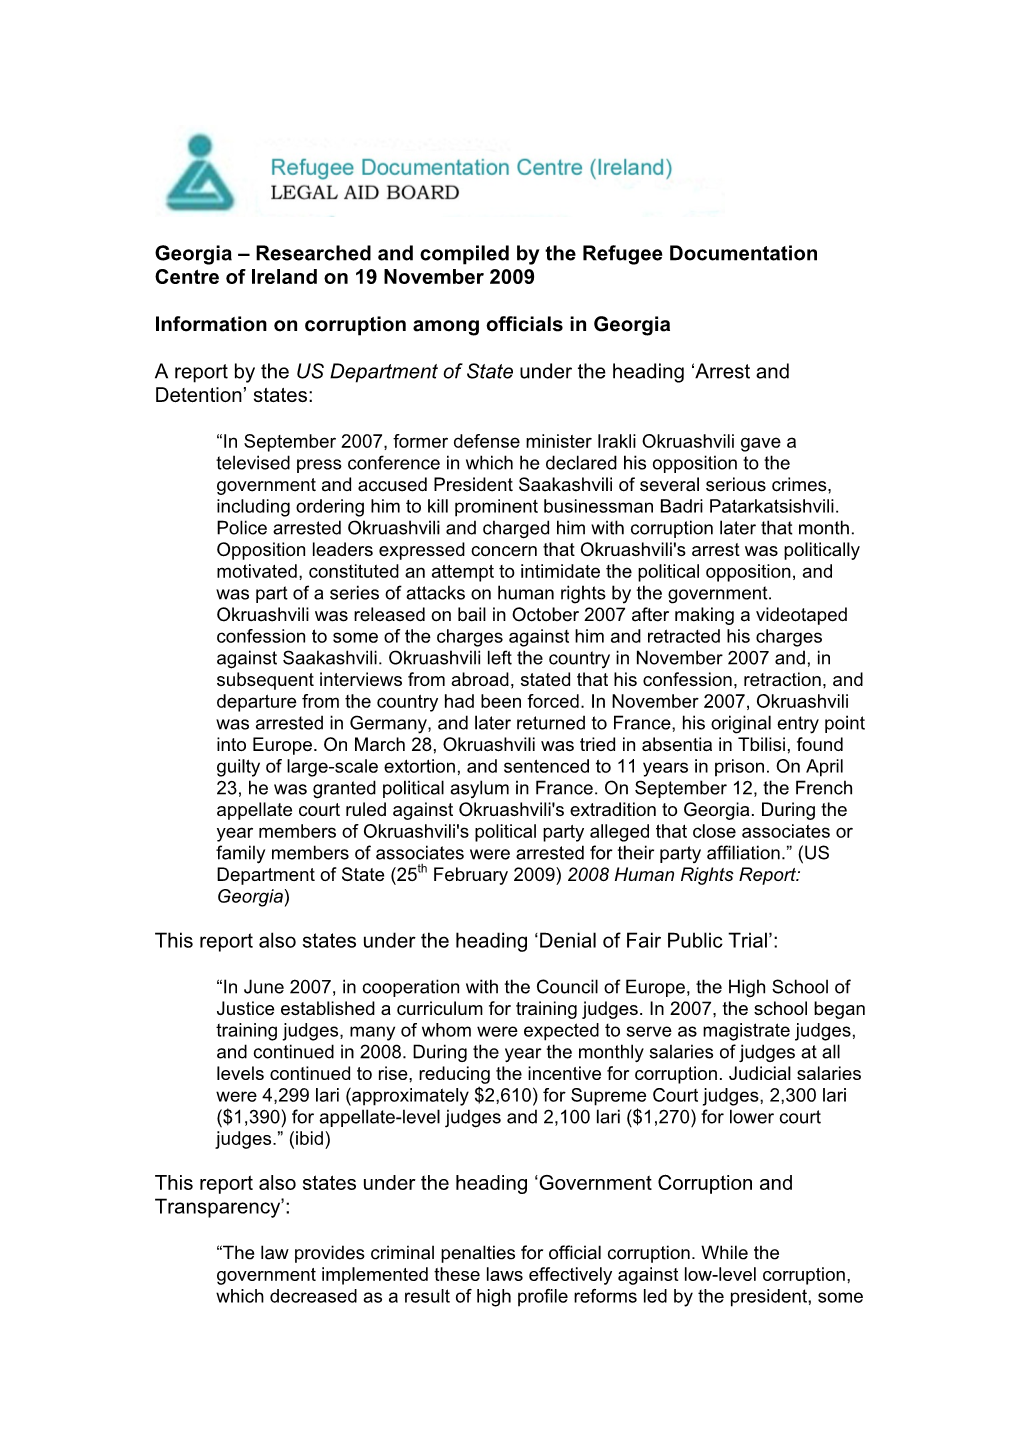 Georgia – Researched and Compiled by the Refugee Documentation Centre of Ireland on 19 November 2009